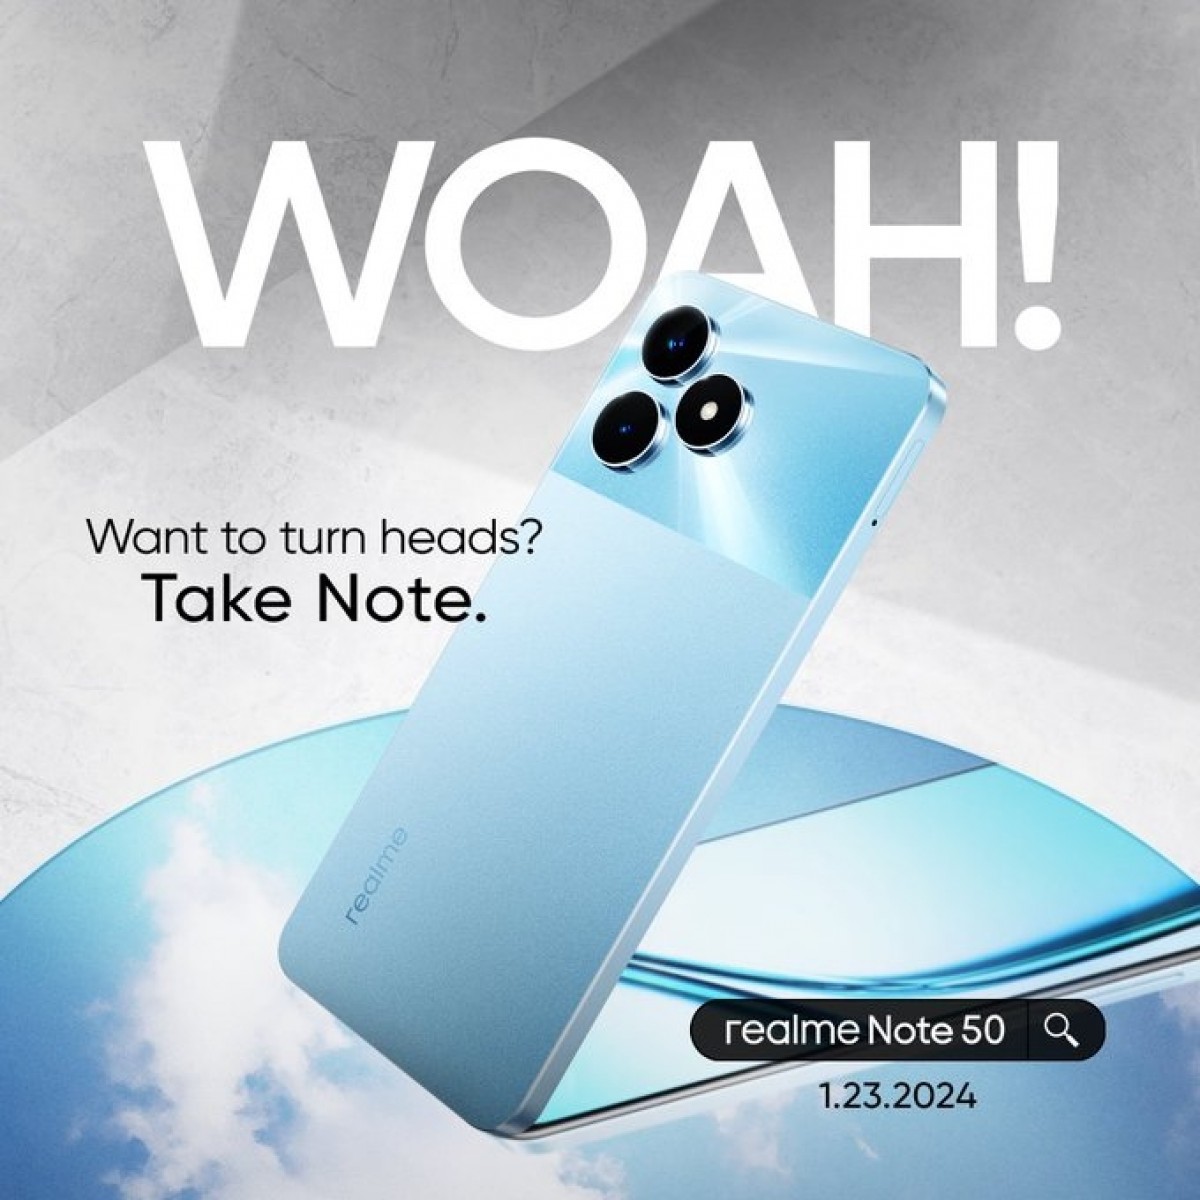 Exclusive: Two more Realme Note phones coming this year, target is 10M sales of the series in 2024